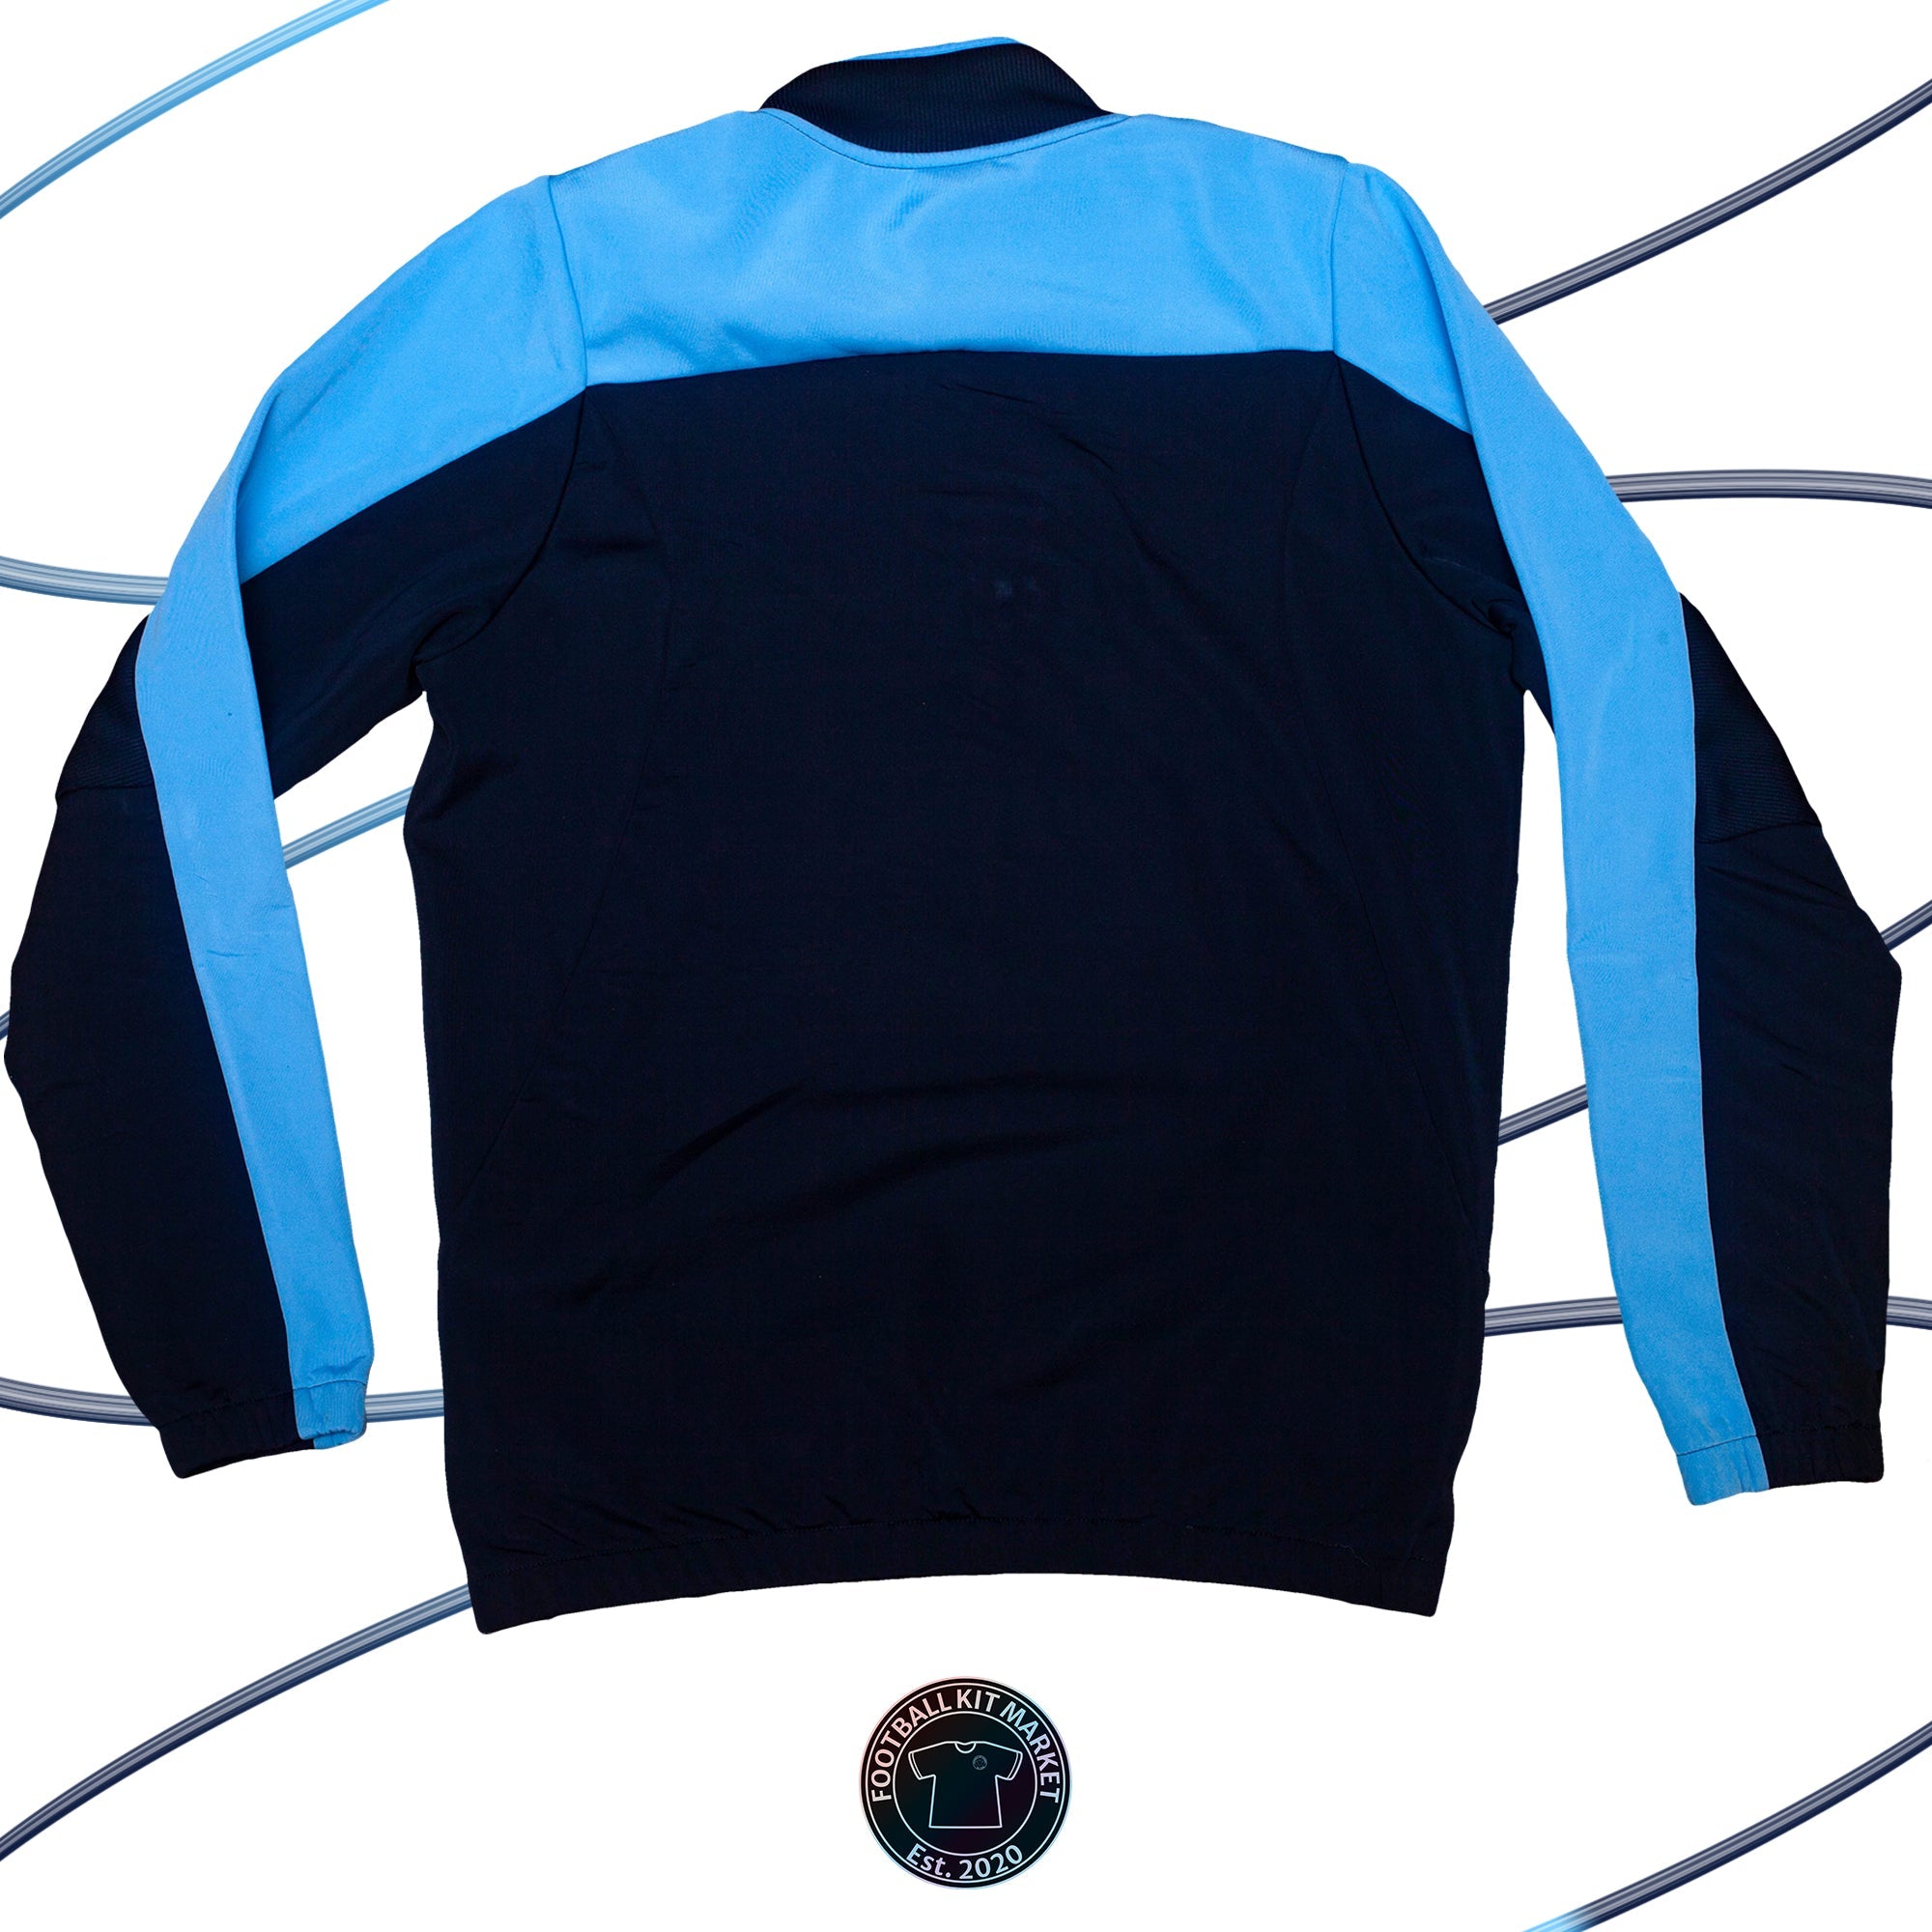 Genuine MANCHESTER CITY Jumper (2012-2013) - UMBRO (M) - Product Image from Football Kit Market